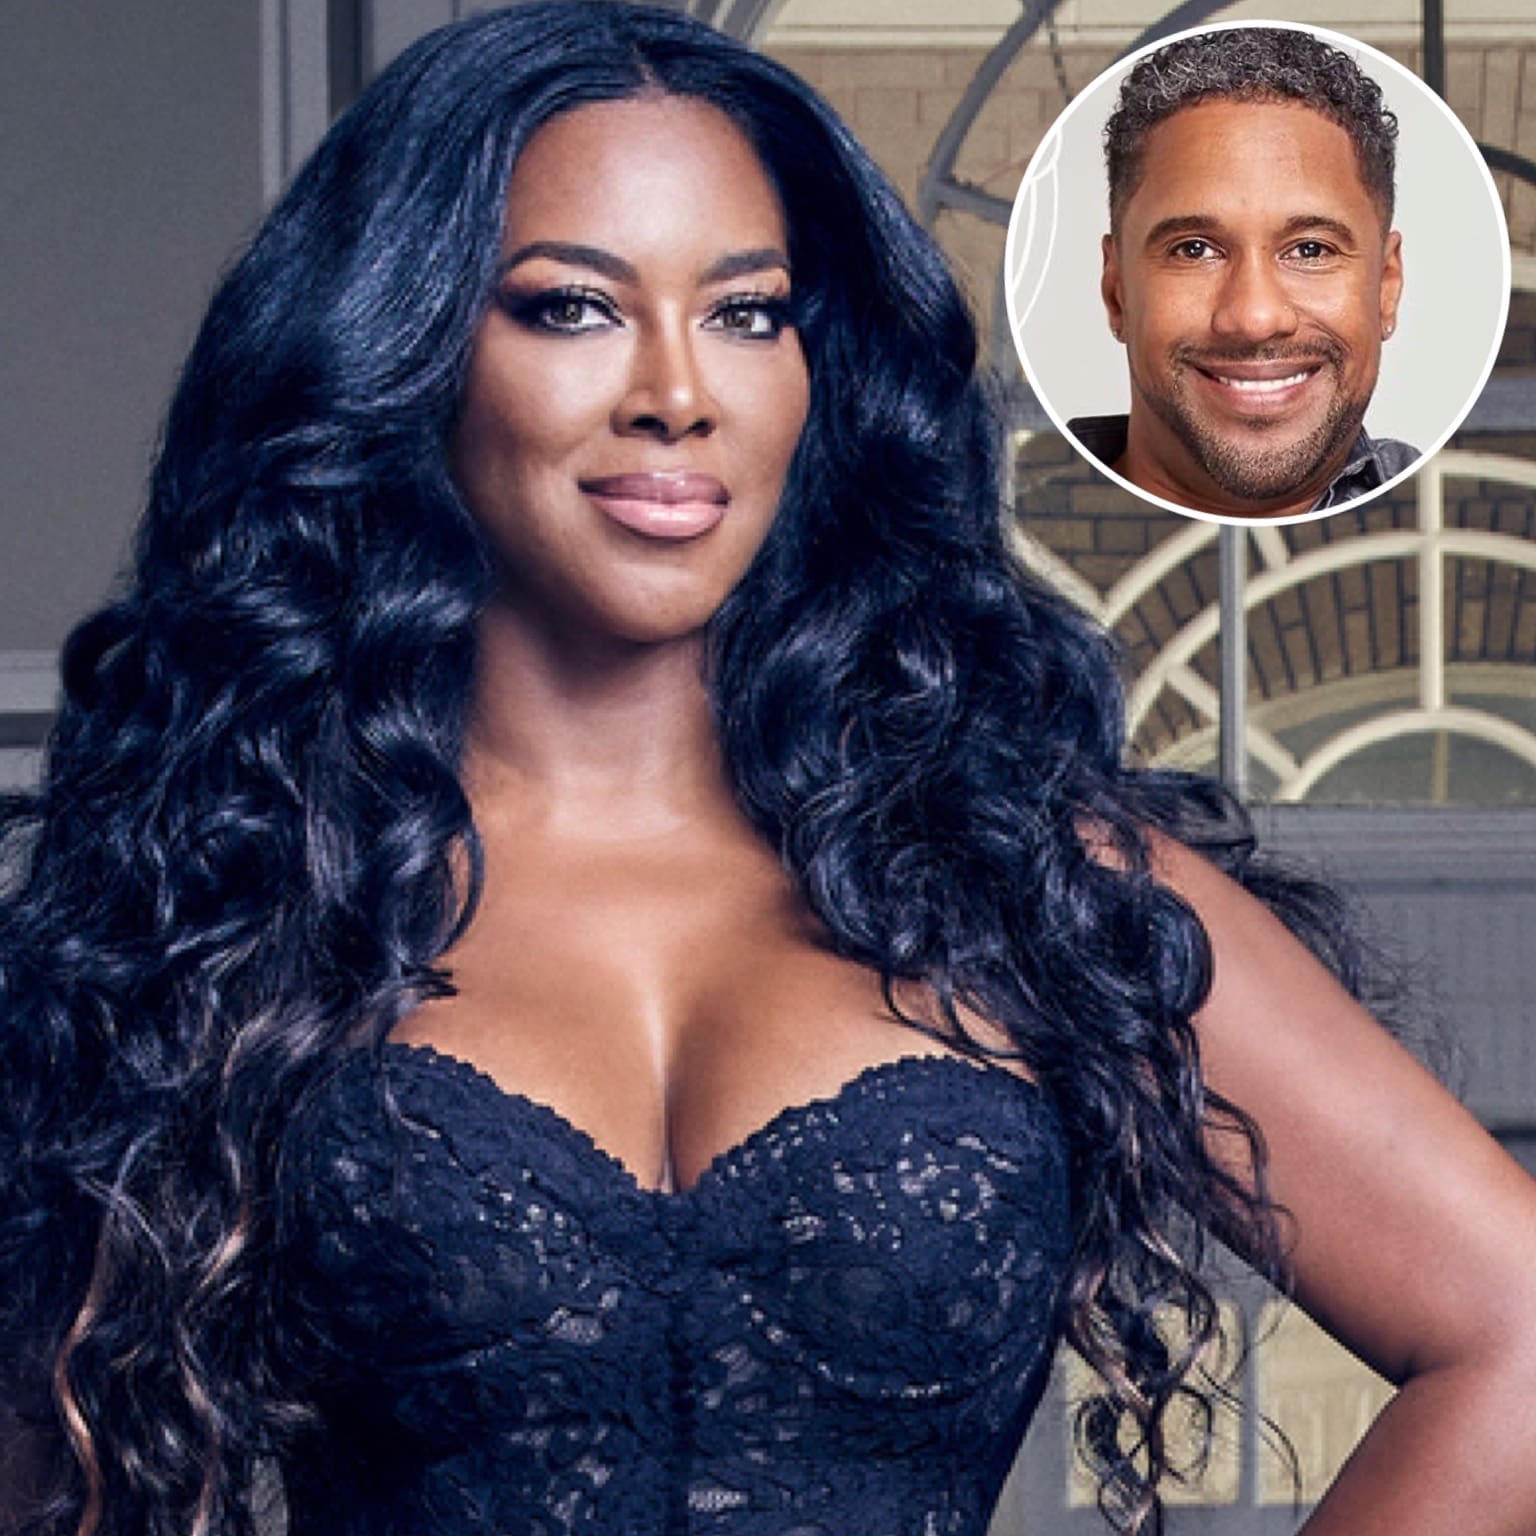 Kenya Moore Shares A Fairytale Video Featuring Marc Daly And Brooklyn Looking Out The Window: 'Snow In Atlanta! Anything Is Possible'